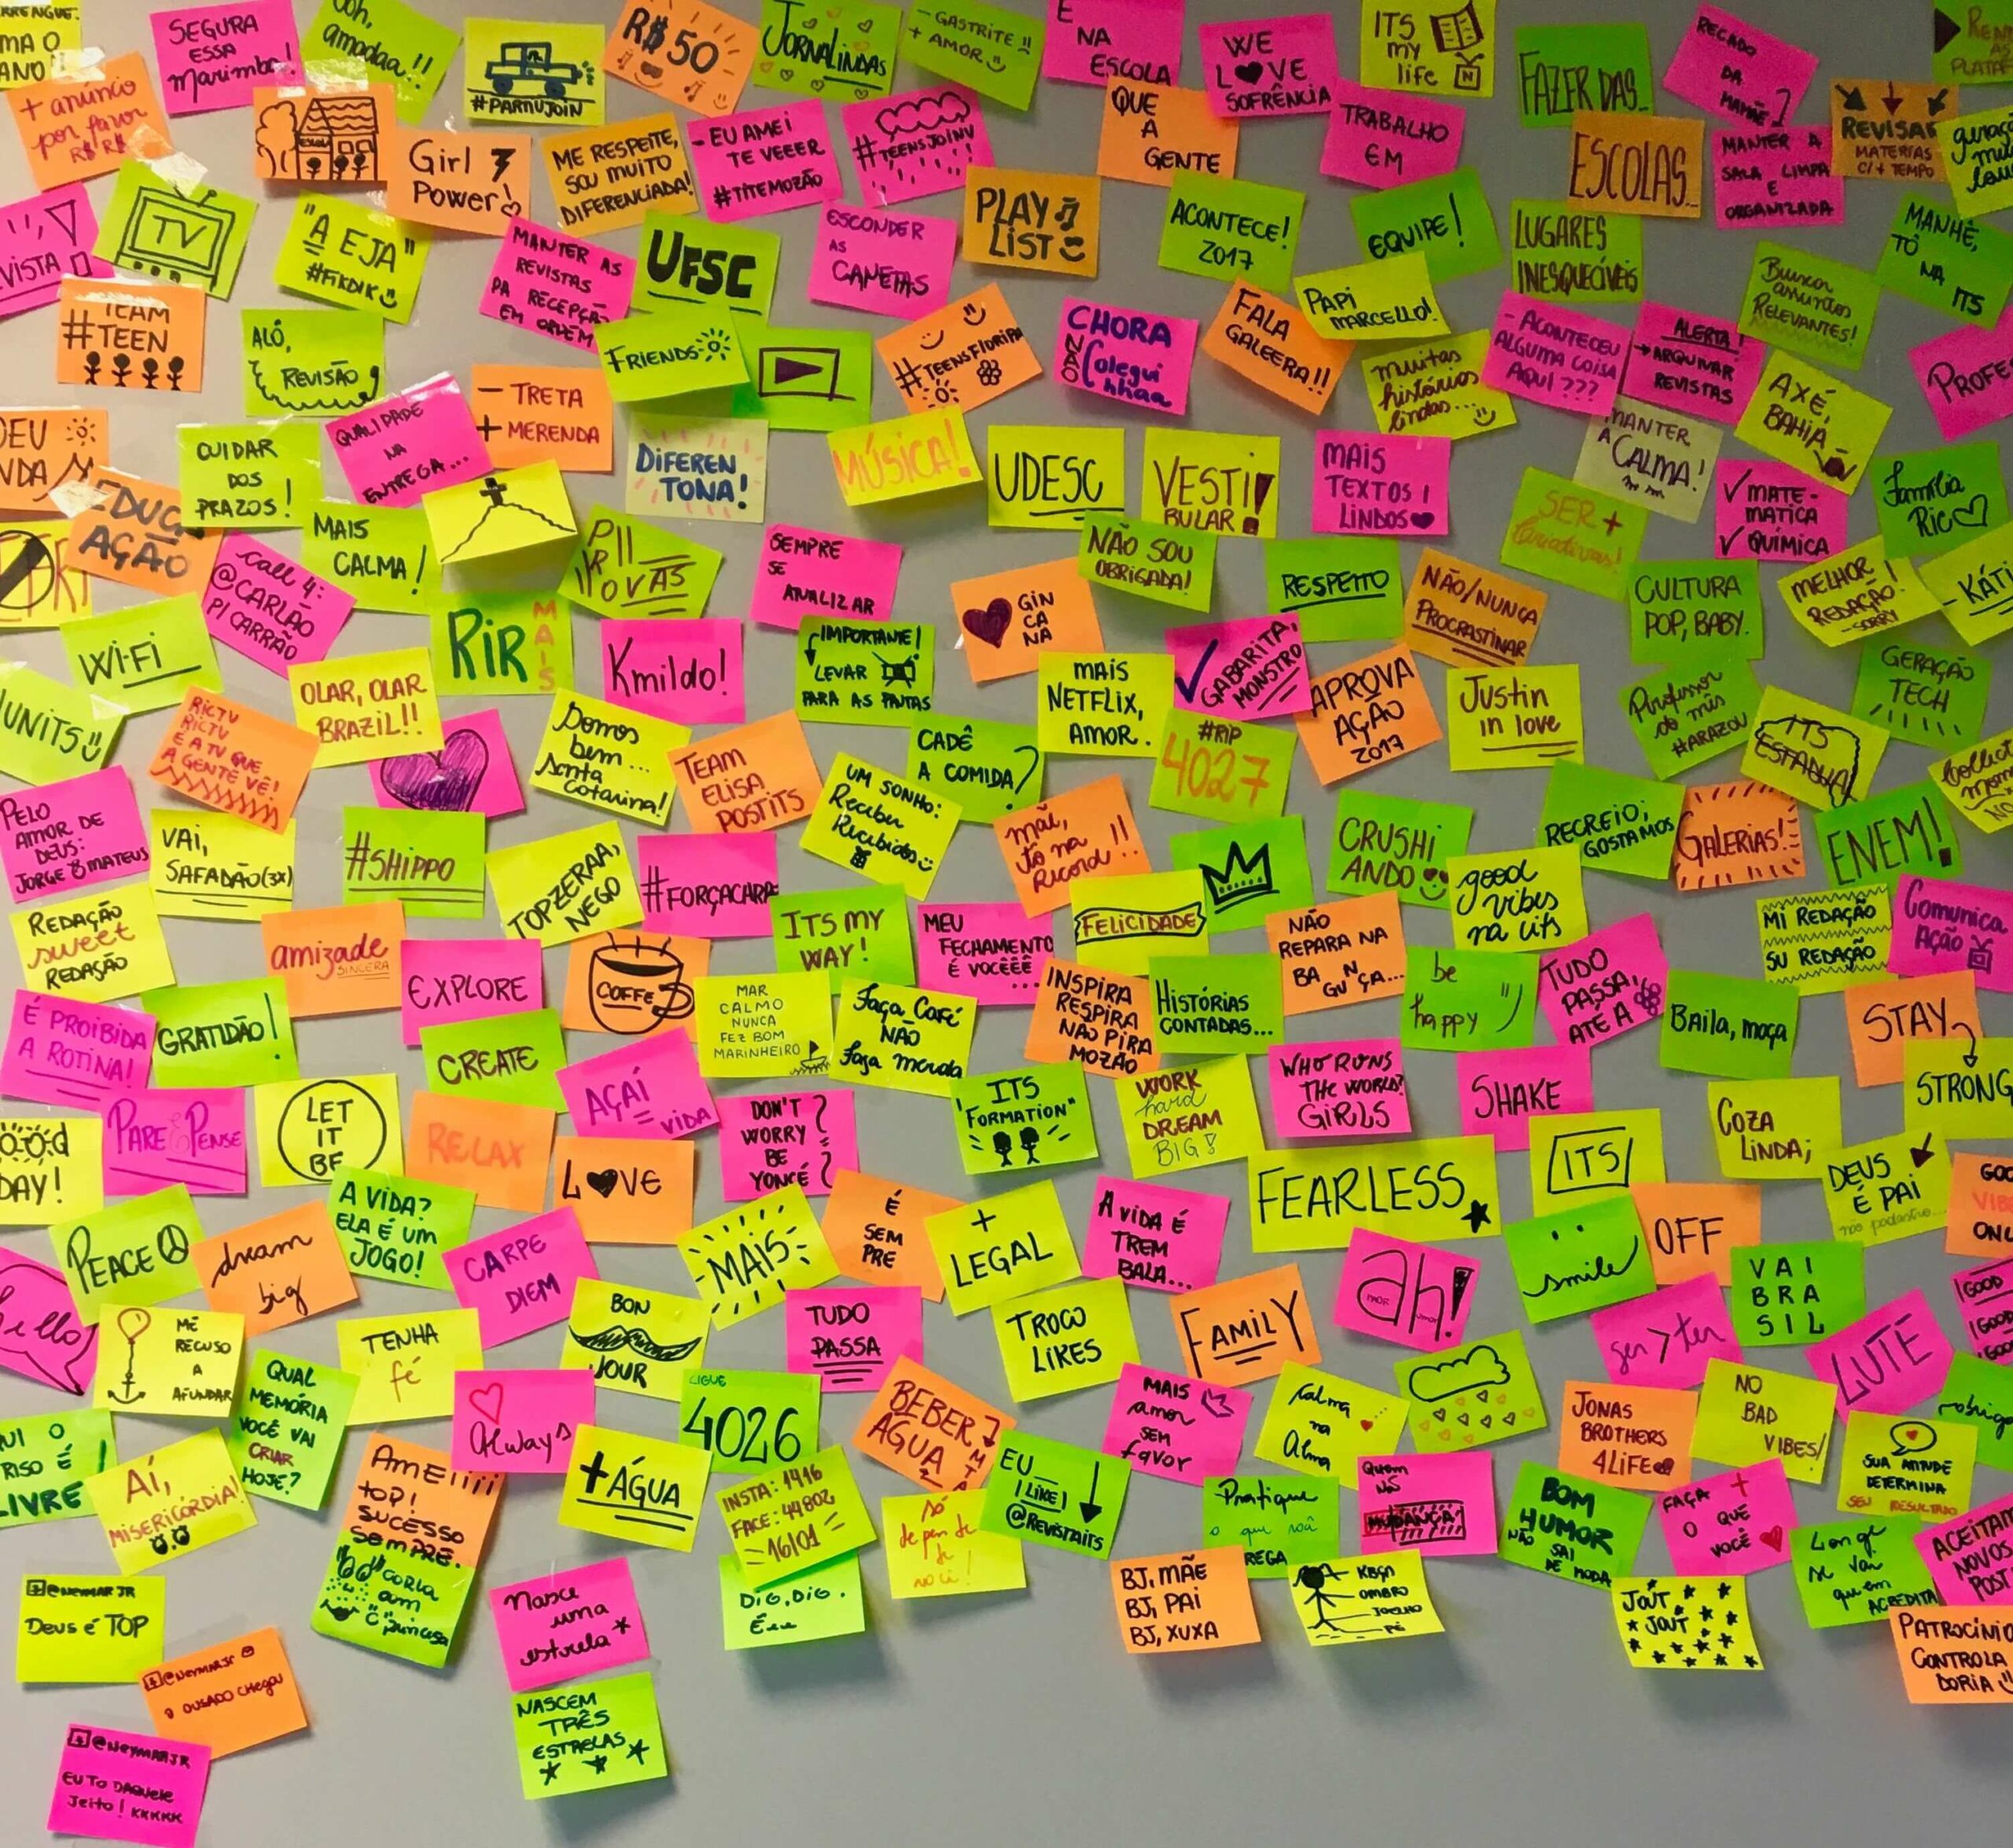 AI note-takers are replacing note set-ups like this whiteboard filled with unorganized sticky notes in bright colors.